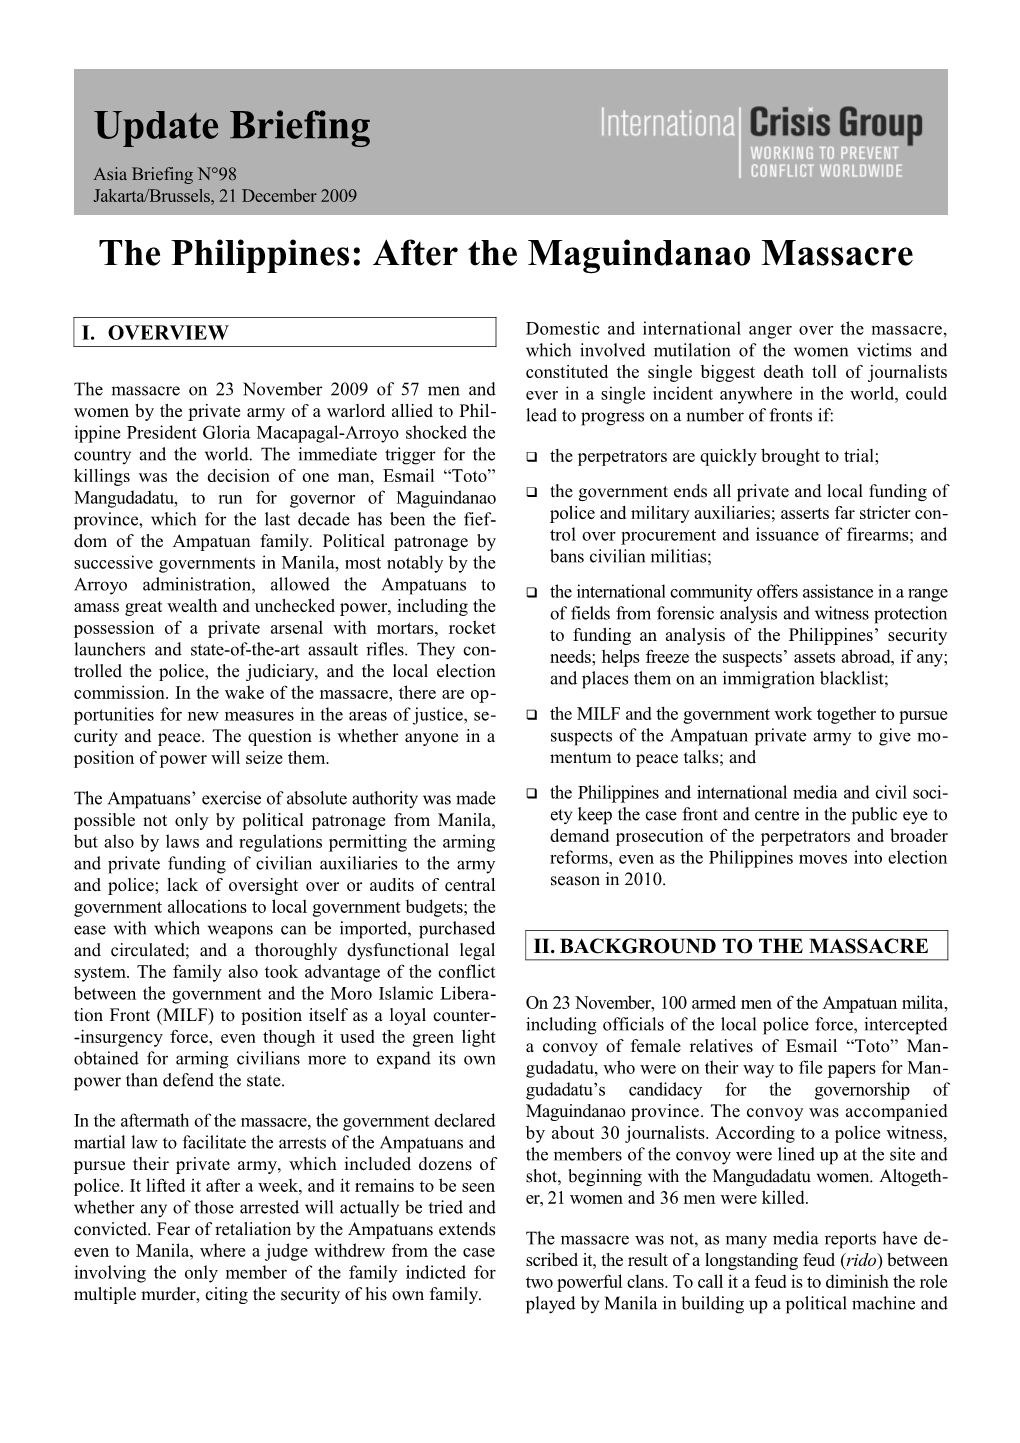 The Philippines: After the Maguindanao Massacre